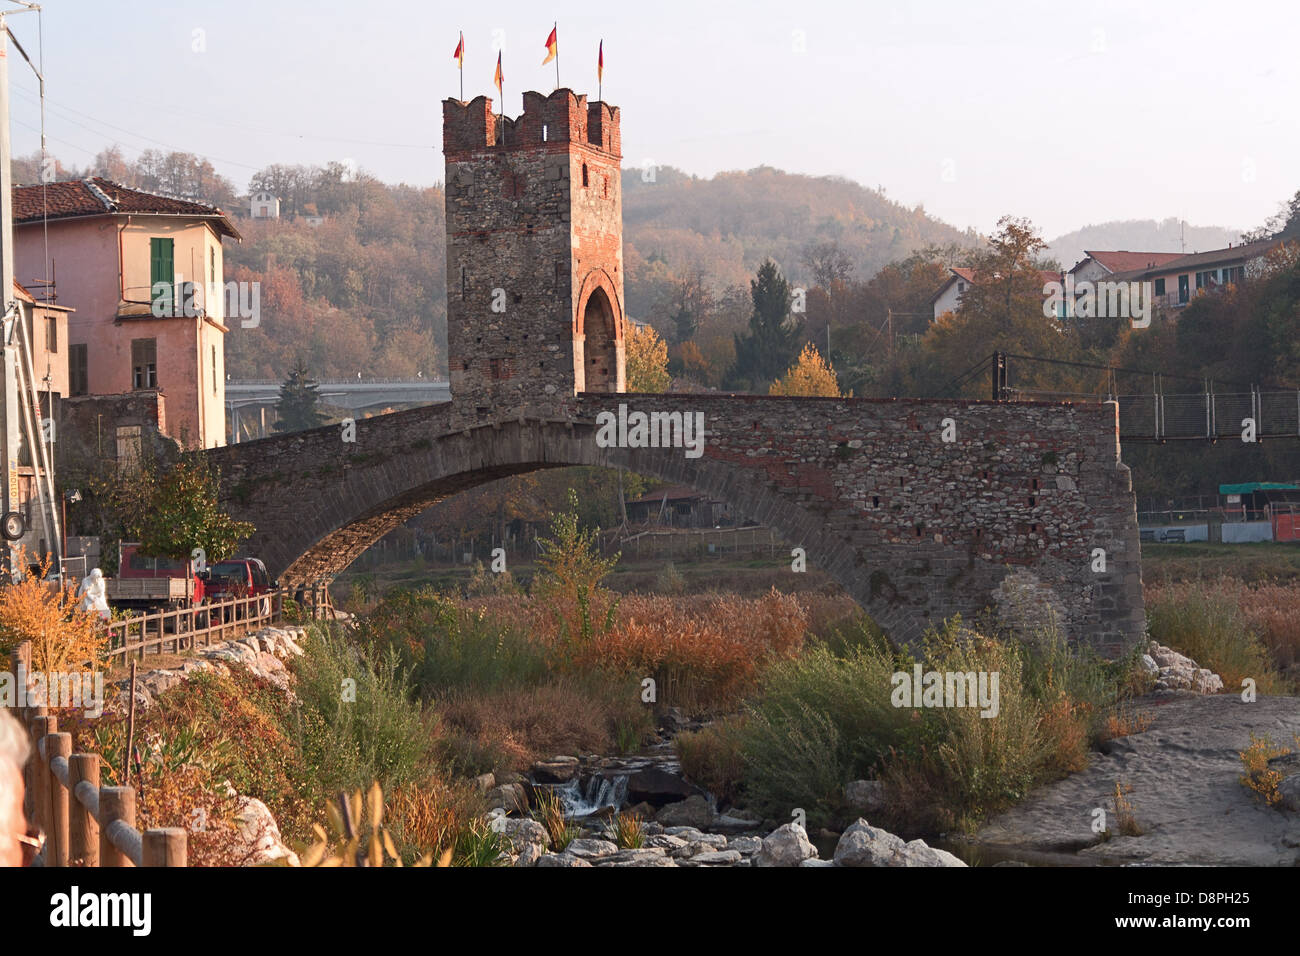 The particoular bridge with tower in Millesimo, a ligurian town Stock Photo